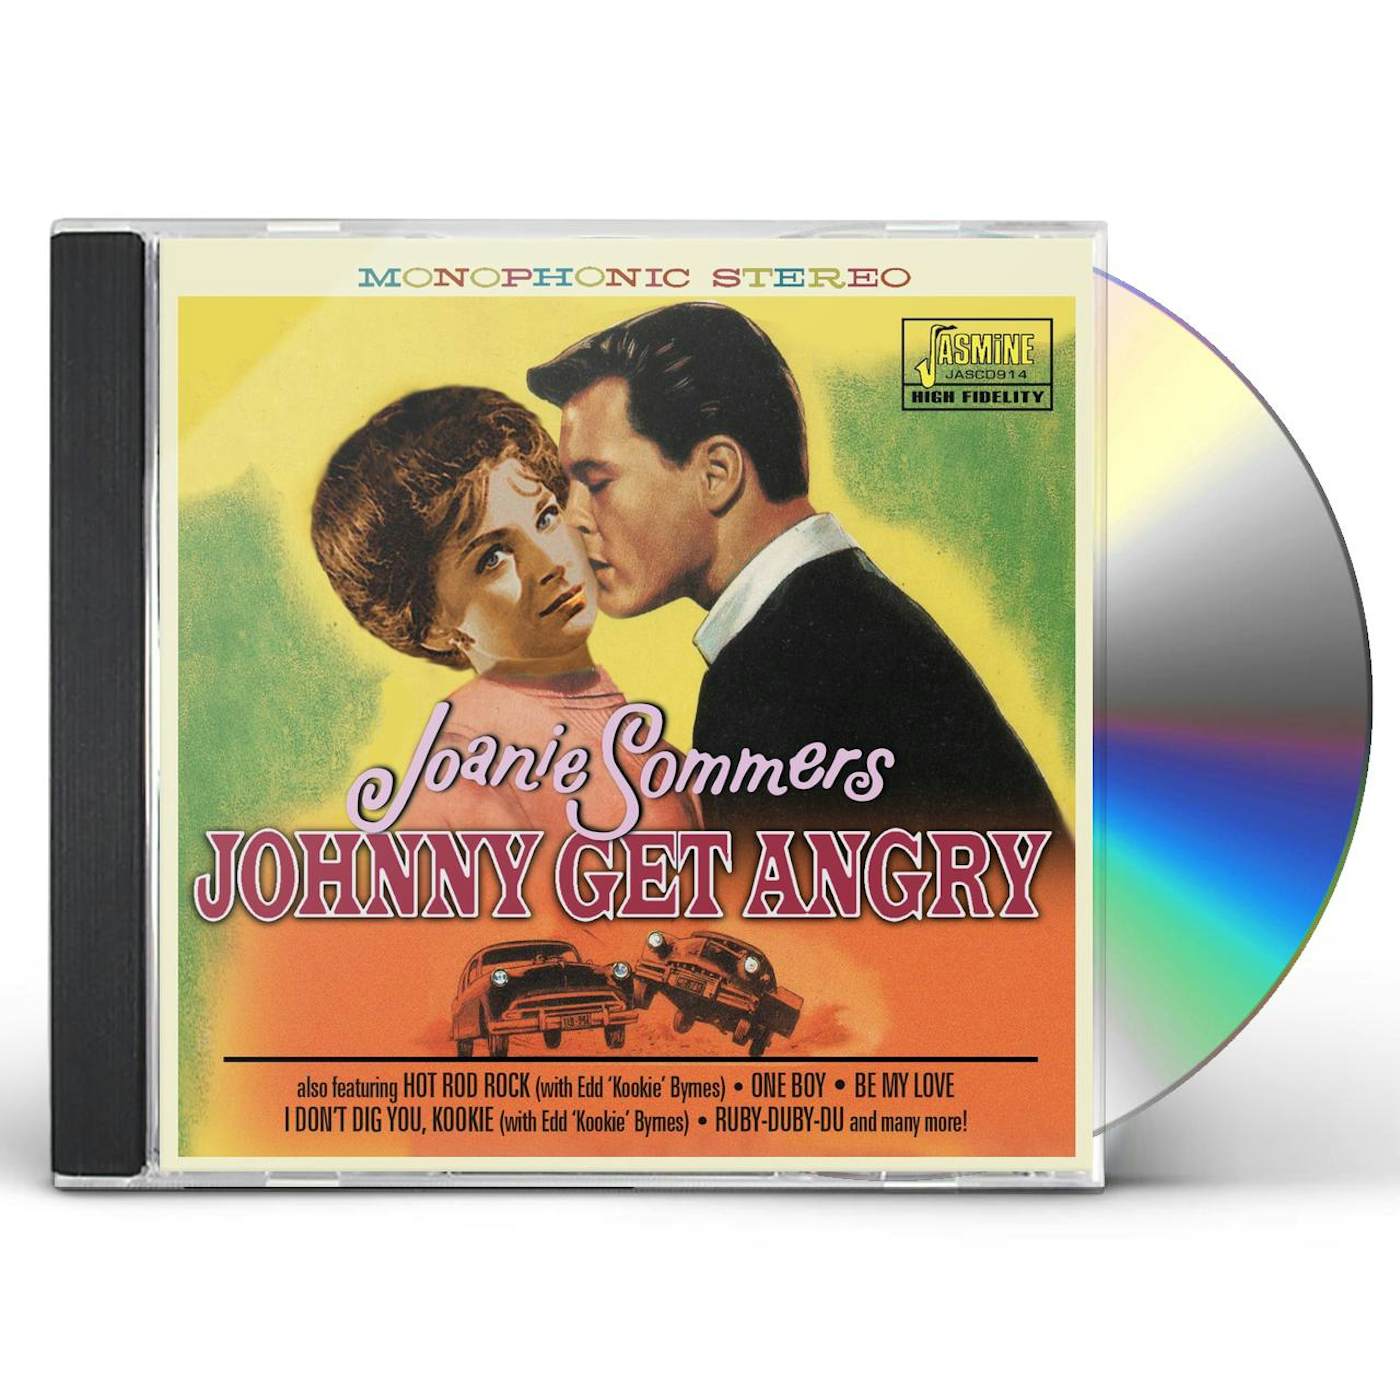 Joanie Sommers JOHNNY GET ANGRY CD